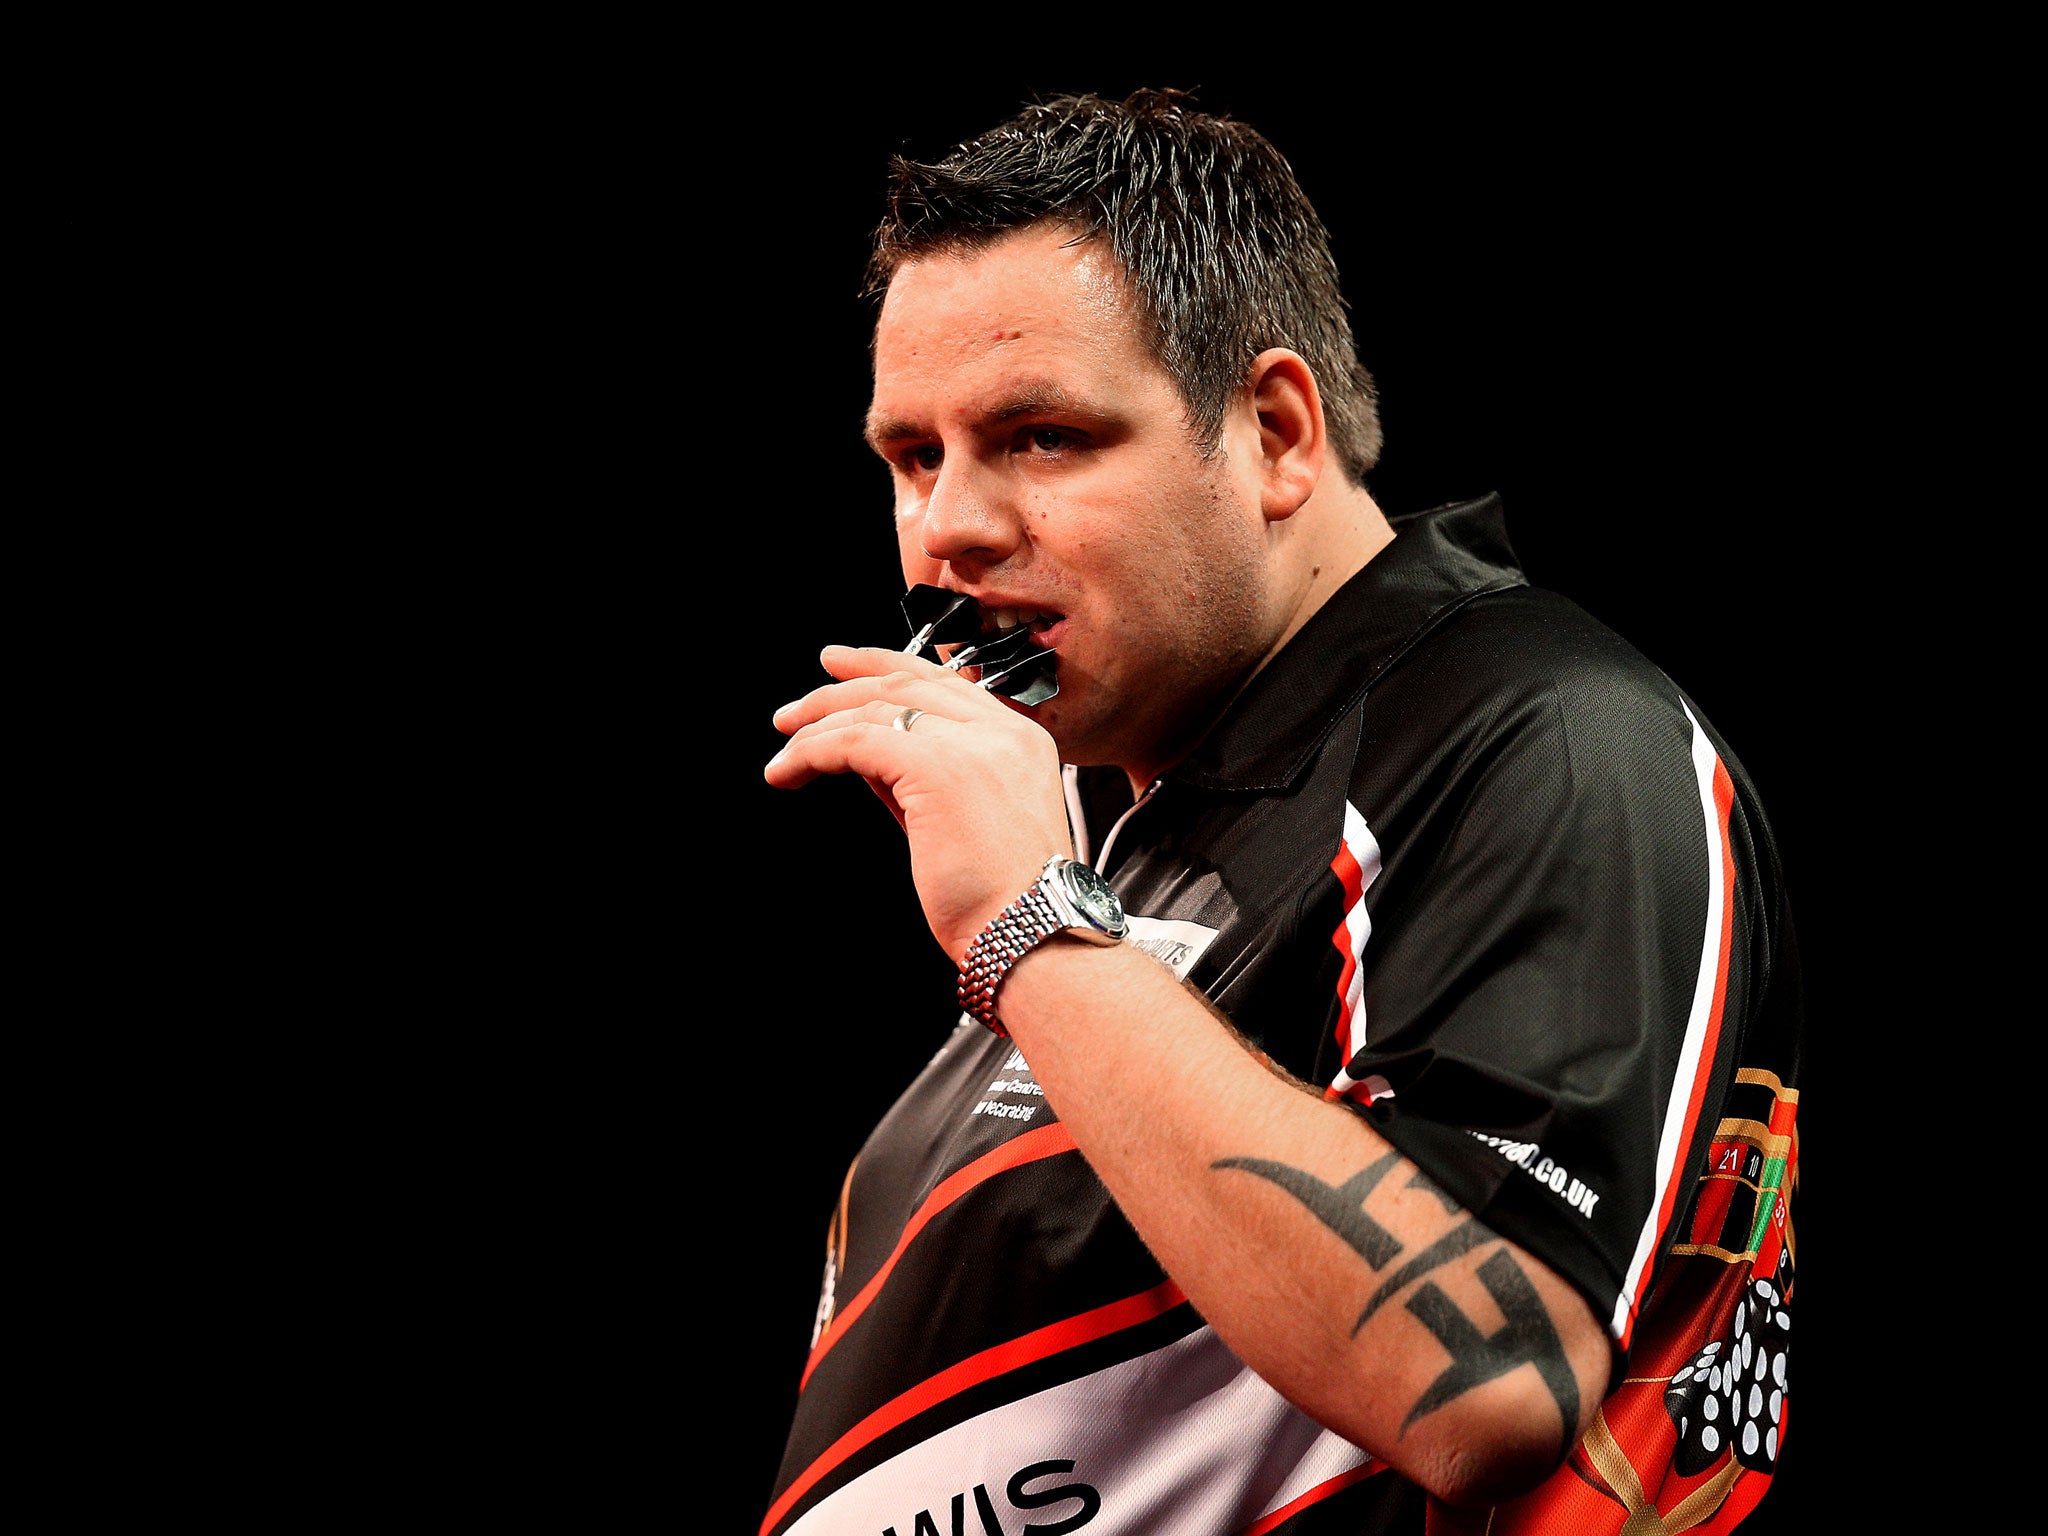 Adrian Lewis in action at the Darts World Championships